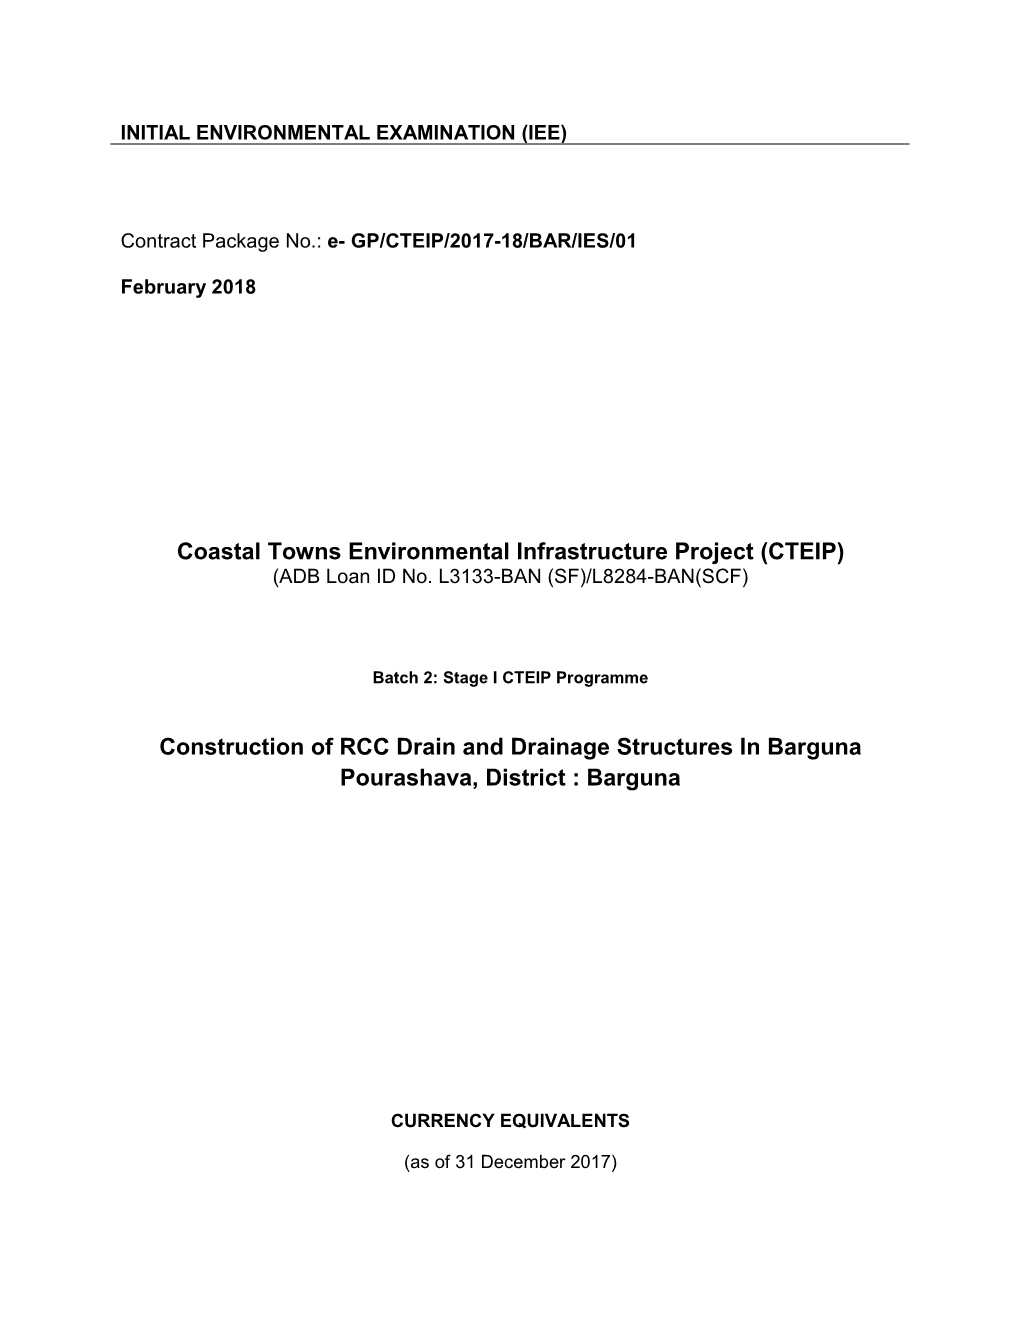 Coastal Towns Environmental Infrastructure Project (CTEIP) Construction of RCC Drain and Drainage Structures in Barguna Pourasha